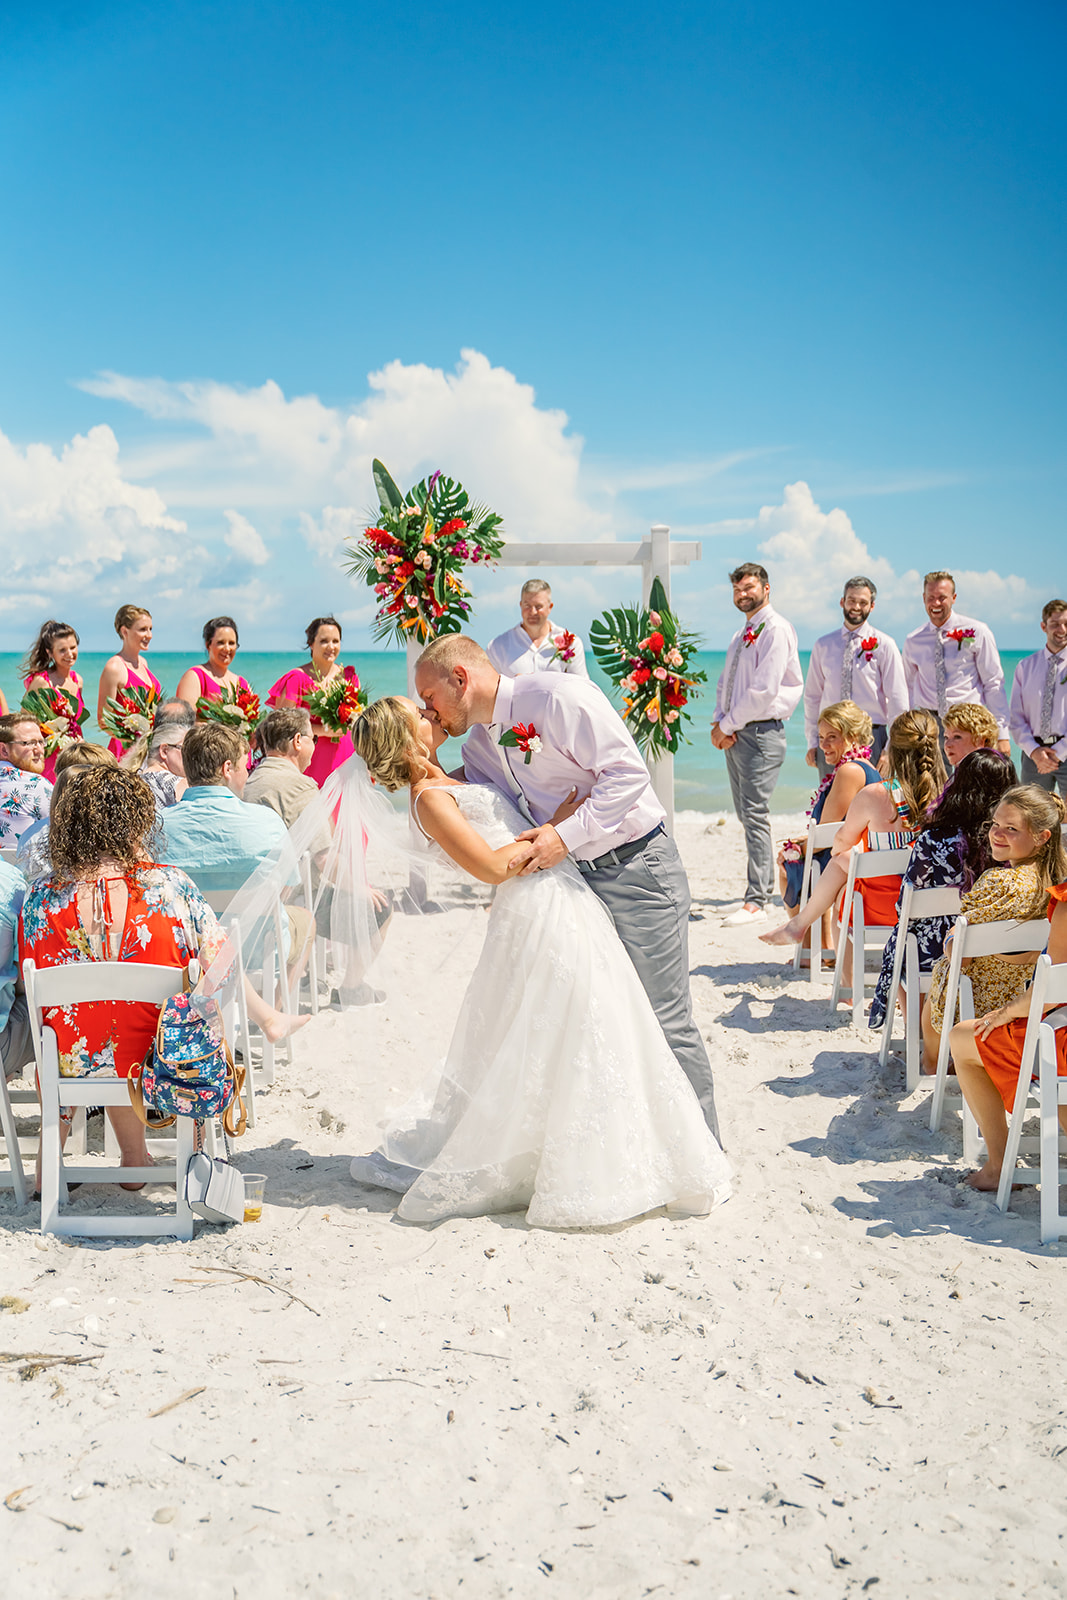 Bride and groom stop for a mid aisle kiss in sunny Sanibel, Florida for their destination wedding